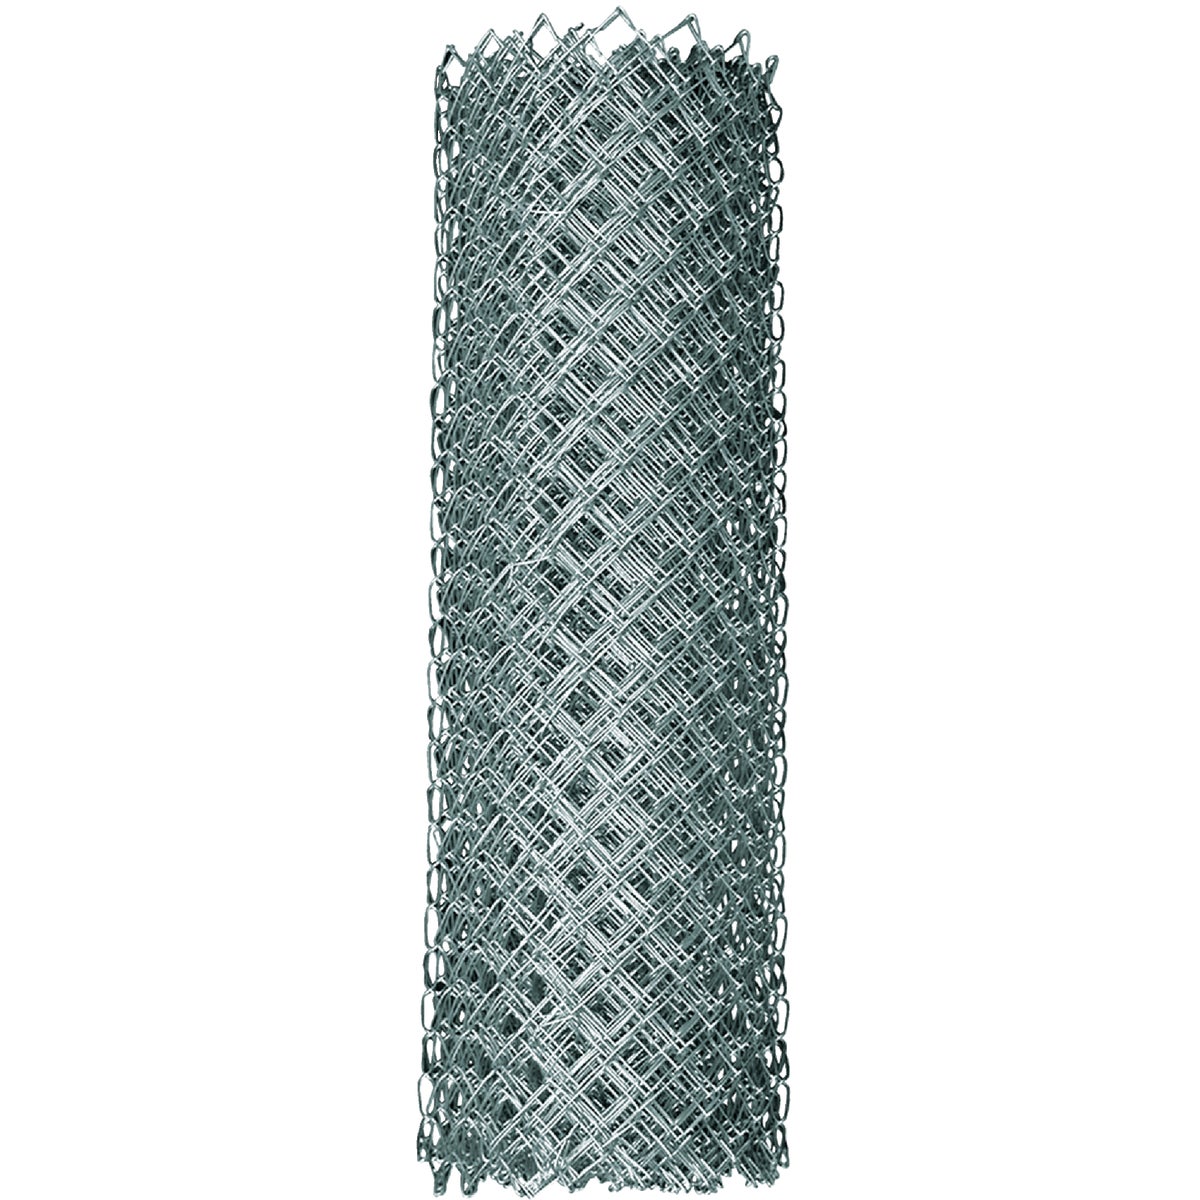 Item 742198, Chain link fencing fabric.